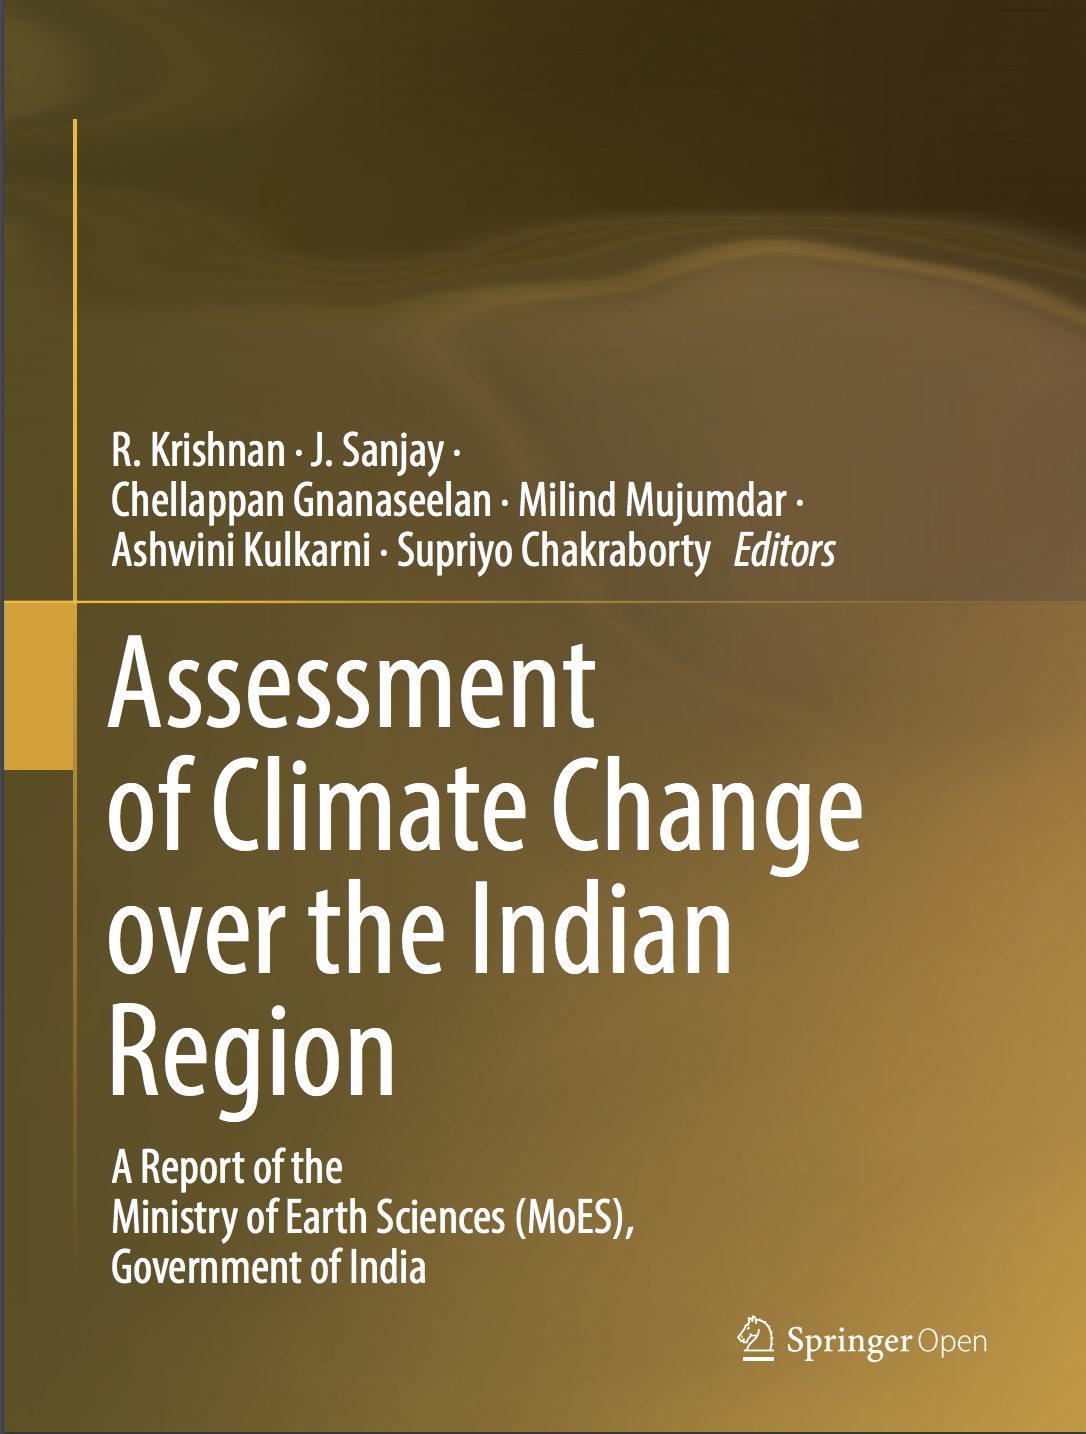 Assessment of climate change over the Indian region